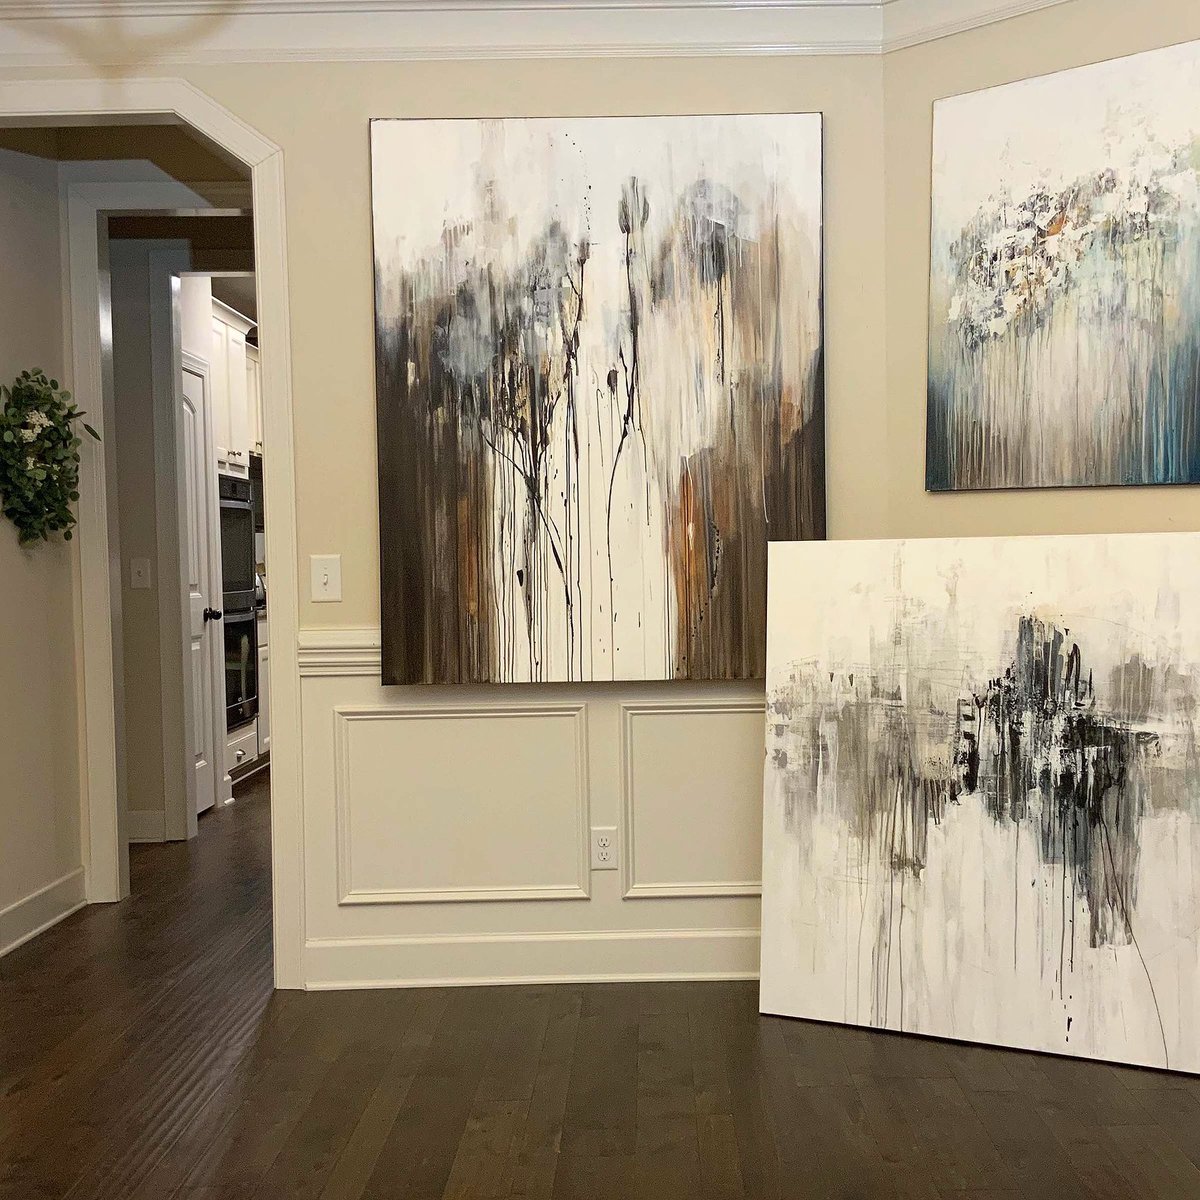 Small sacrifice… using my dining room as a photo studio. Where do you photograph your art? #art #artist #ArtistoftheSummer #ArtistOfTheYear #artistsoninstagram #abstractartwork #abstraction #abstractpainting #painting #interiordesign #Interiors